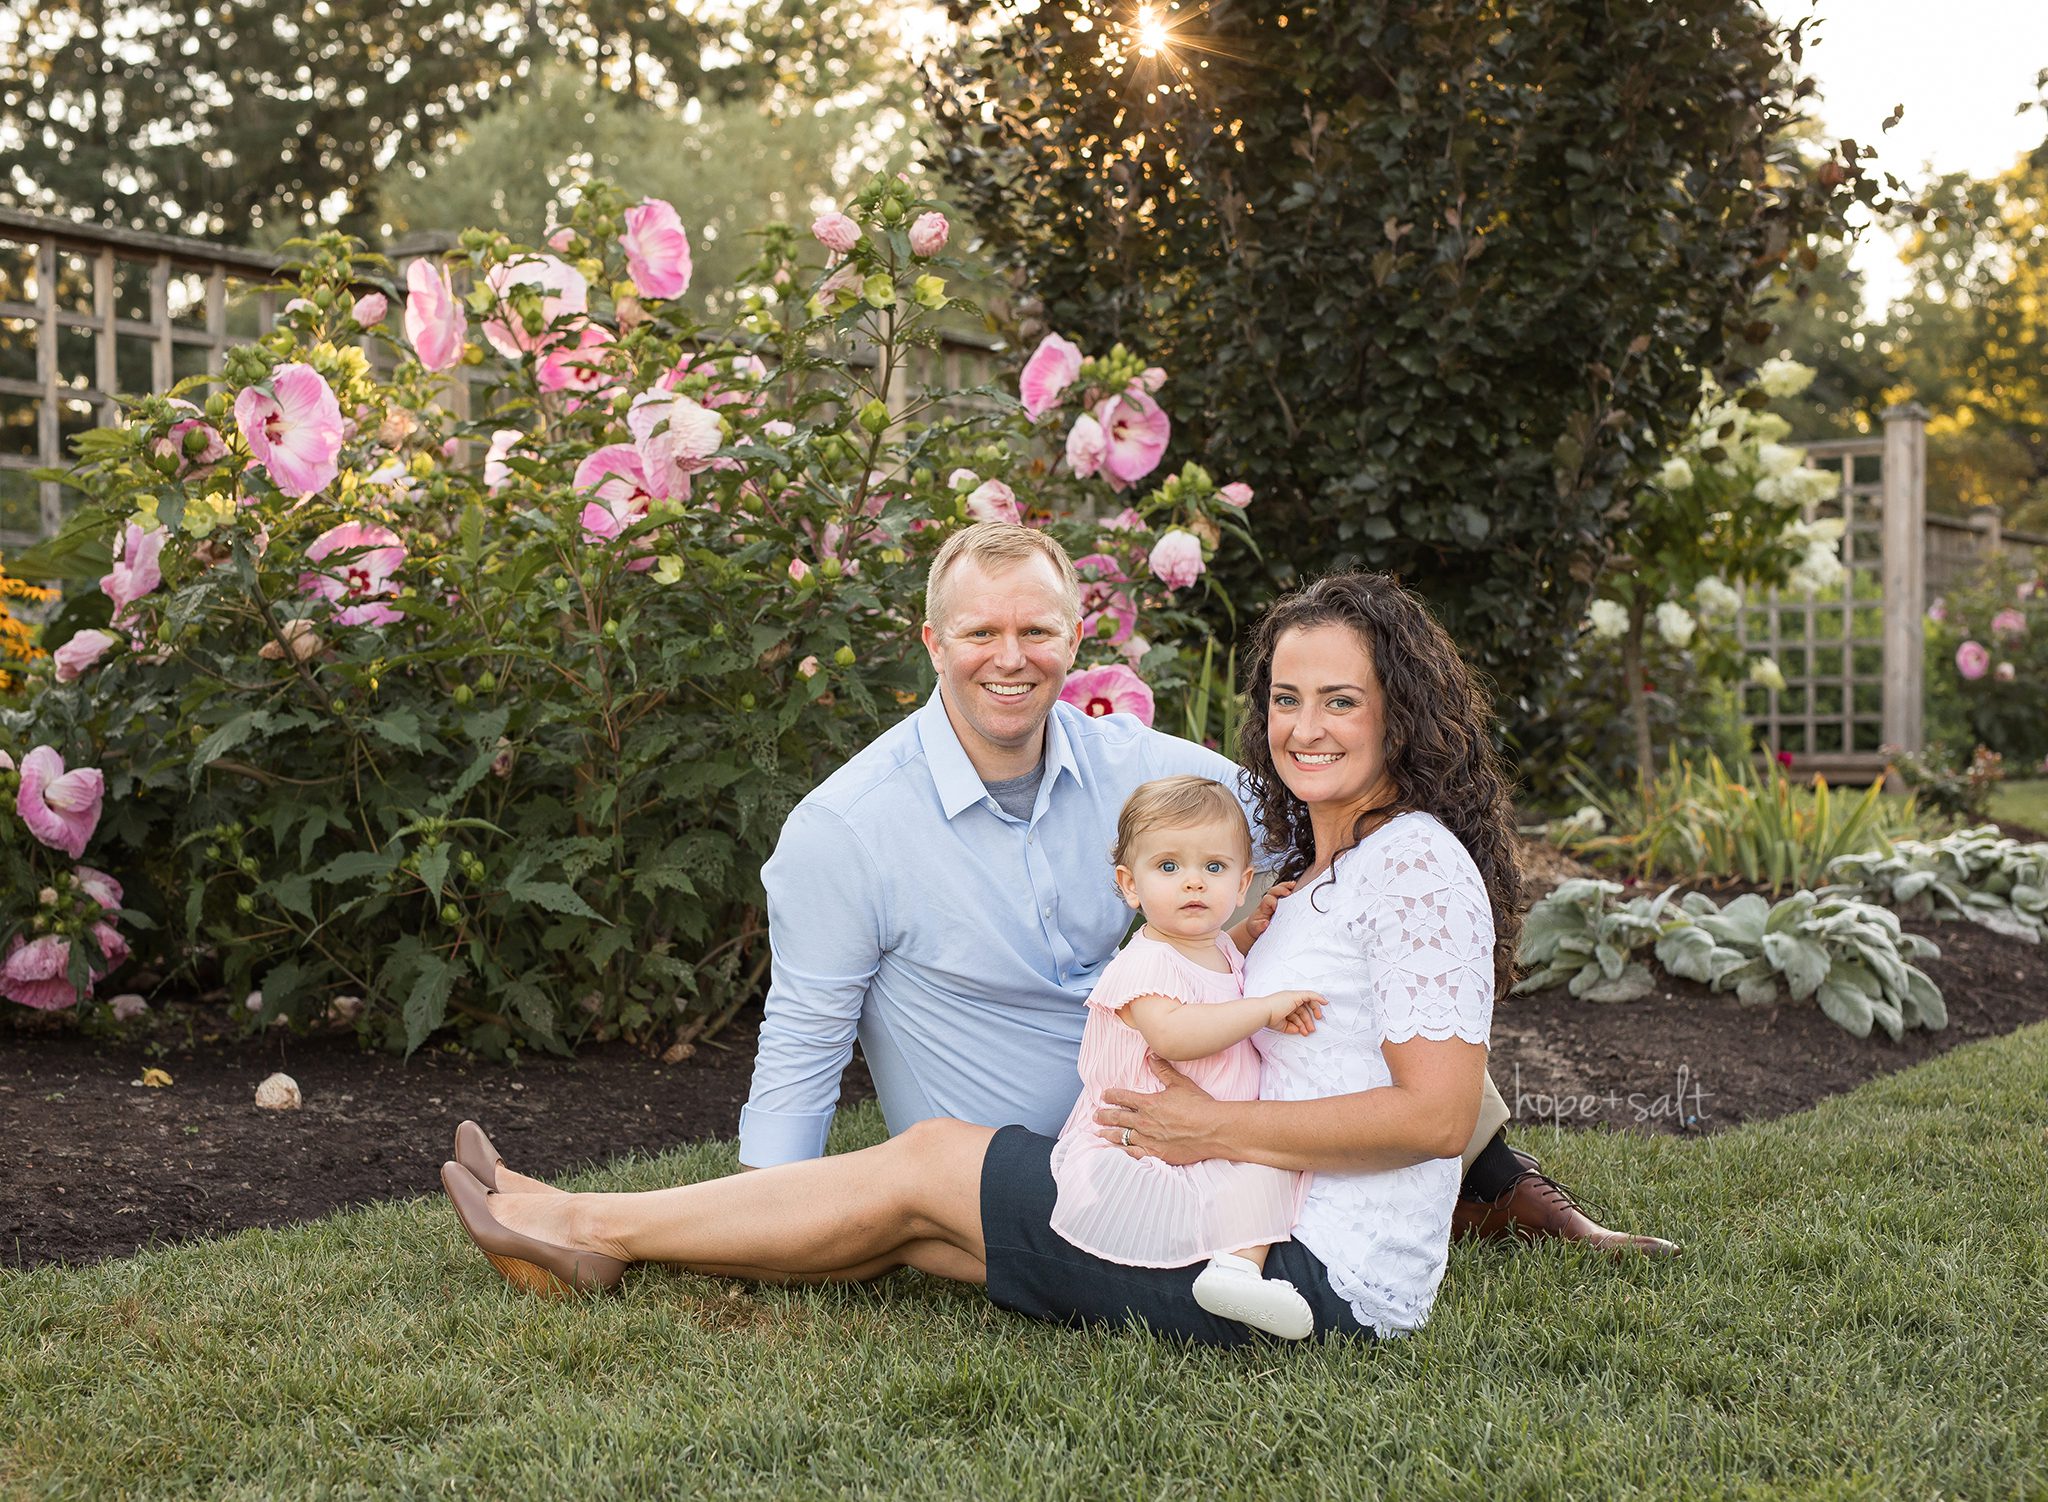 burlington family photographer_rose flower garden session down by the lake with one year old baby girl and parents first birthday